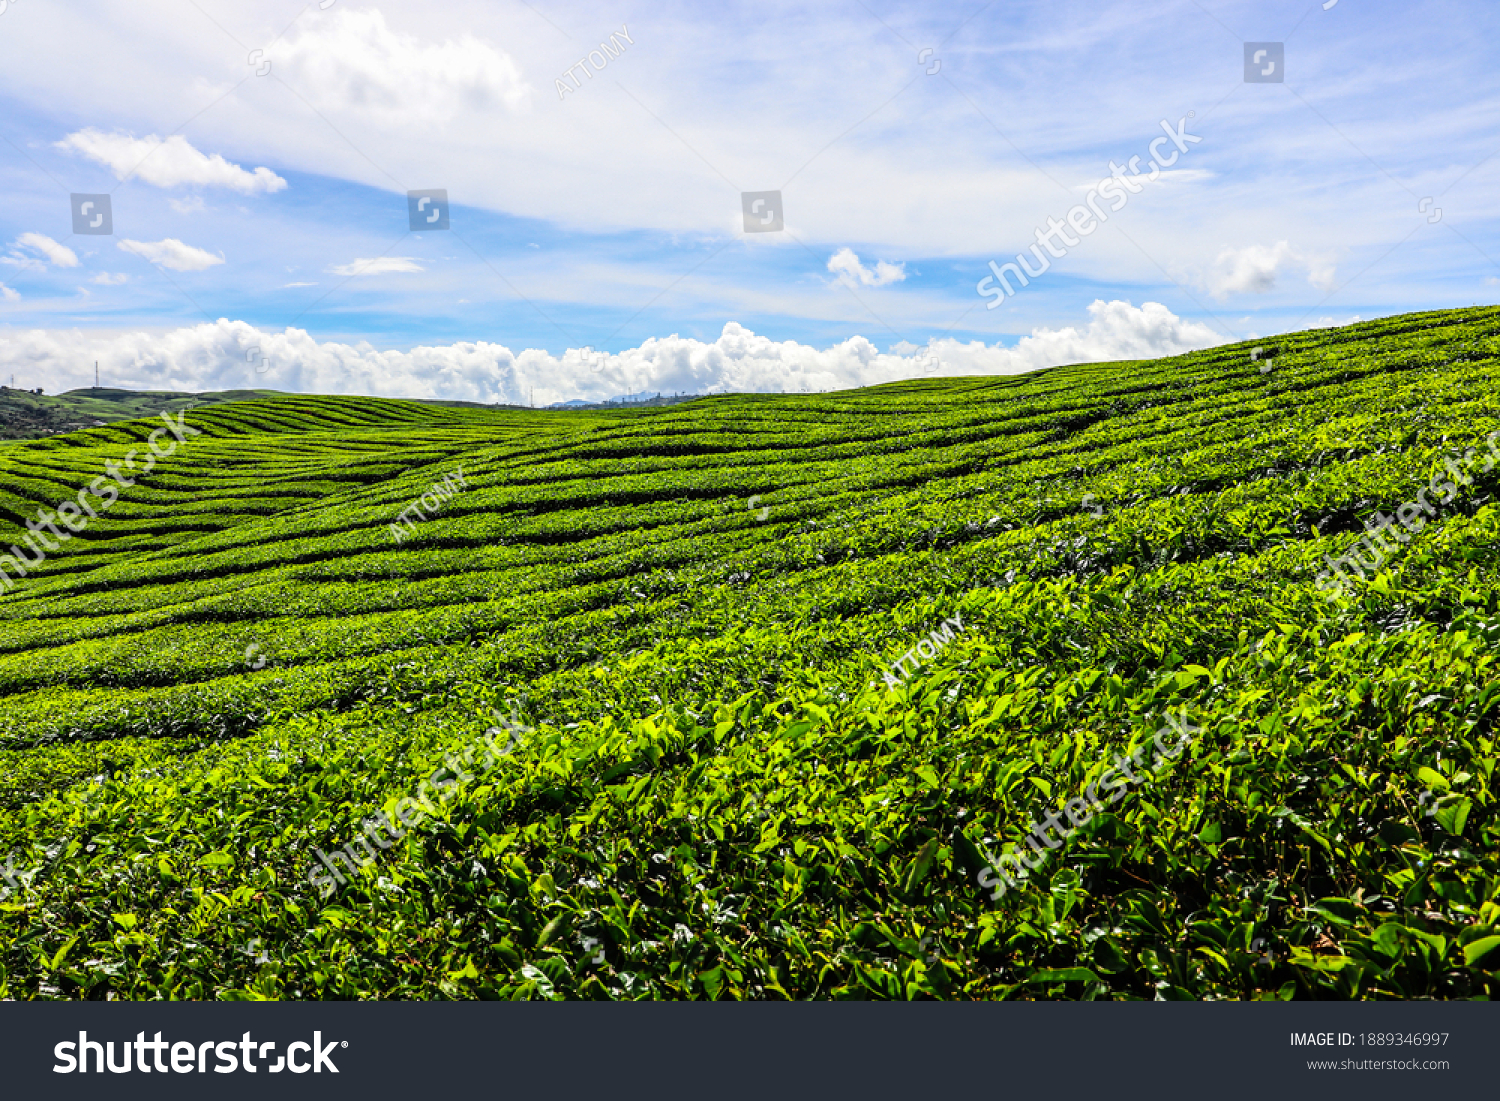 Kayu Aro tea plantation is the oldest in Indonesia, also the largest and the second highest in the world, located at the foot of Mount Kerinci. owned by PTPN 6 (PT. Perkebunan Nusantara VI) Kerinci. #1889346997